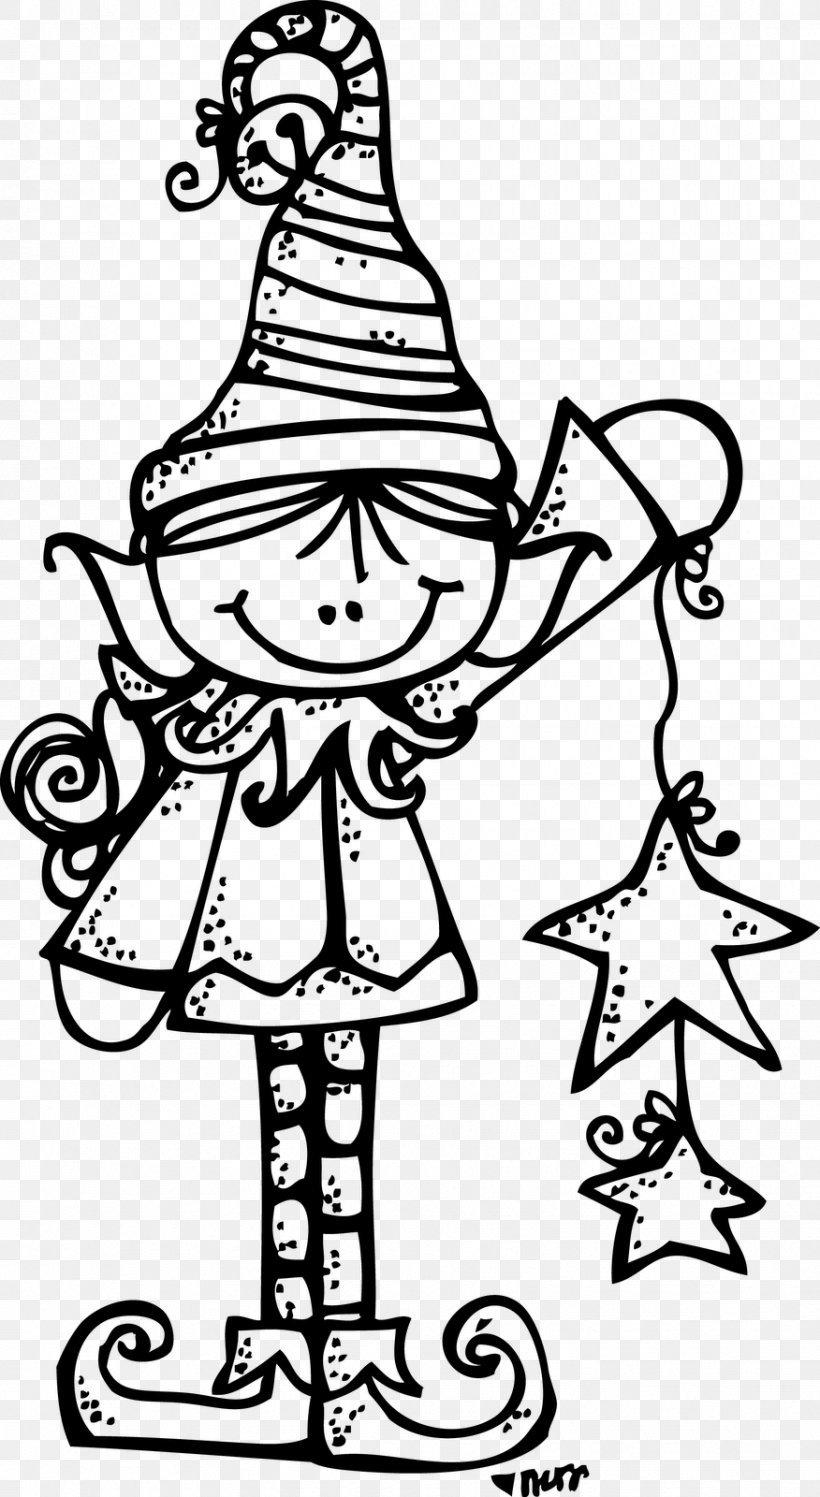 The Elf On The Shelf Santa Claus Christmas Elf, PNG, 876x1600px, Elf On The Shelf, Art, Artwork, Black And White, Christmas Download Free